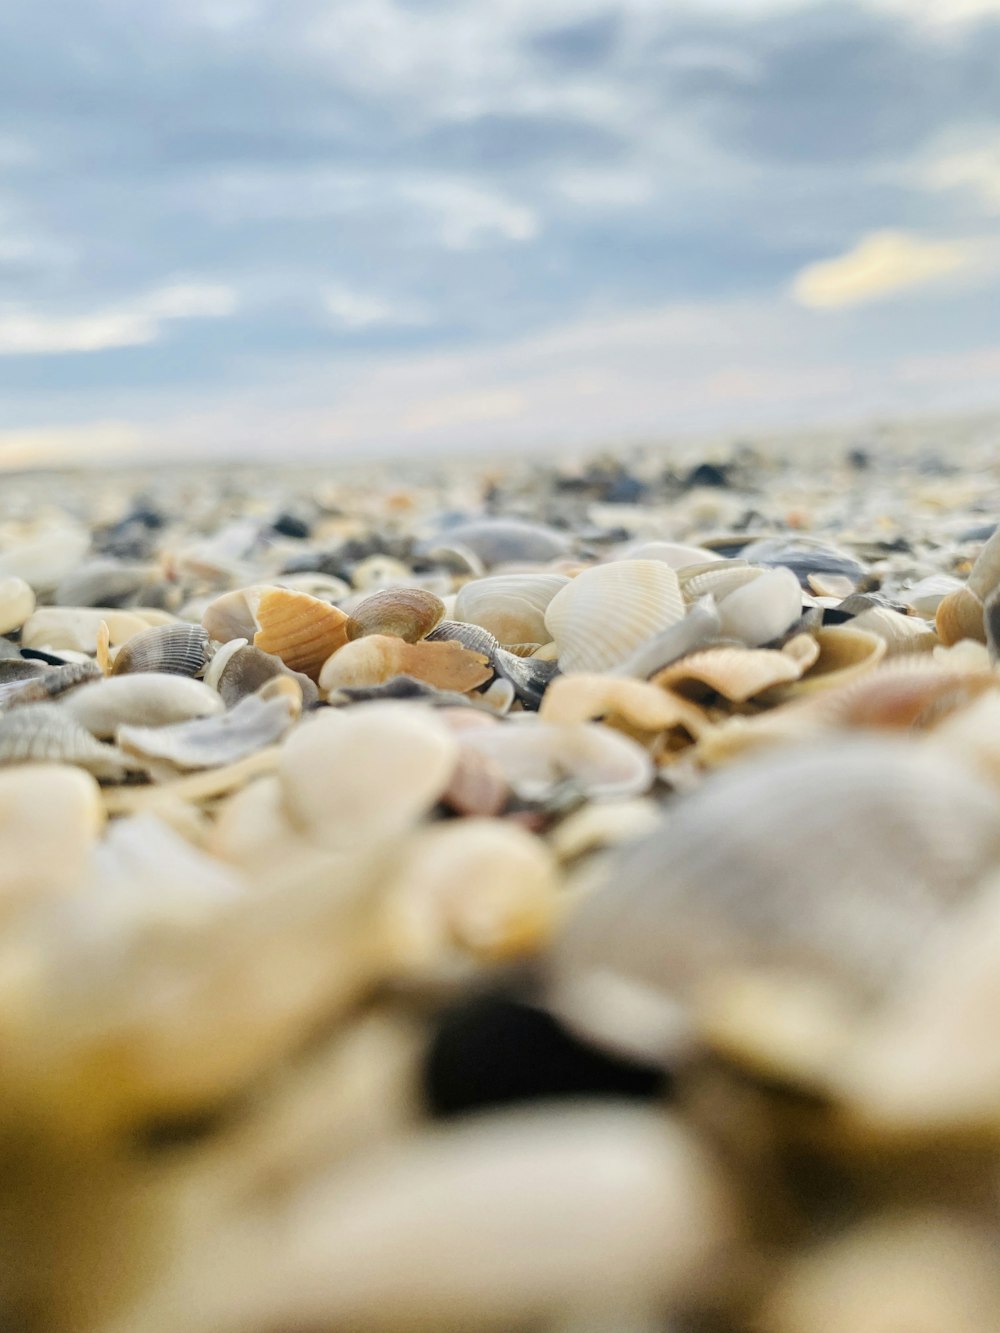 white and brown sea shells on shore during daytime